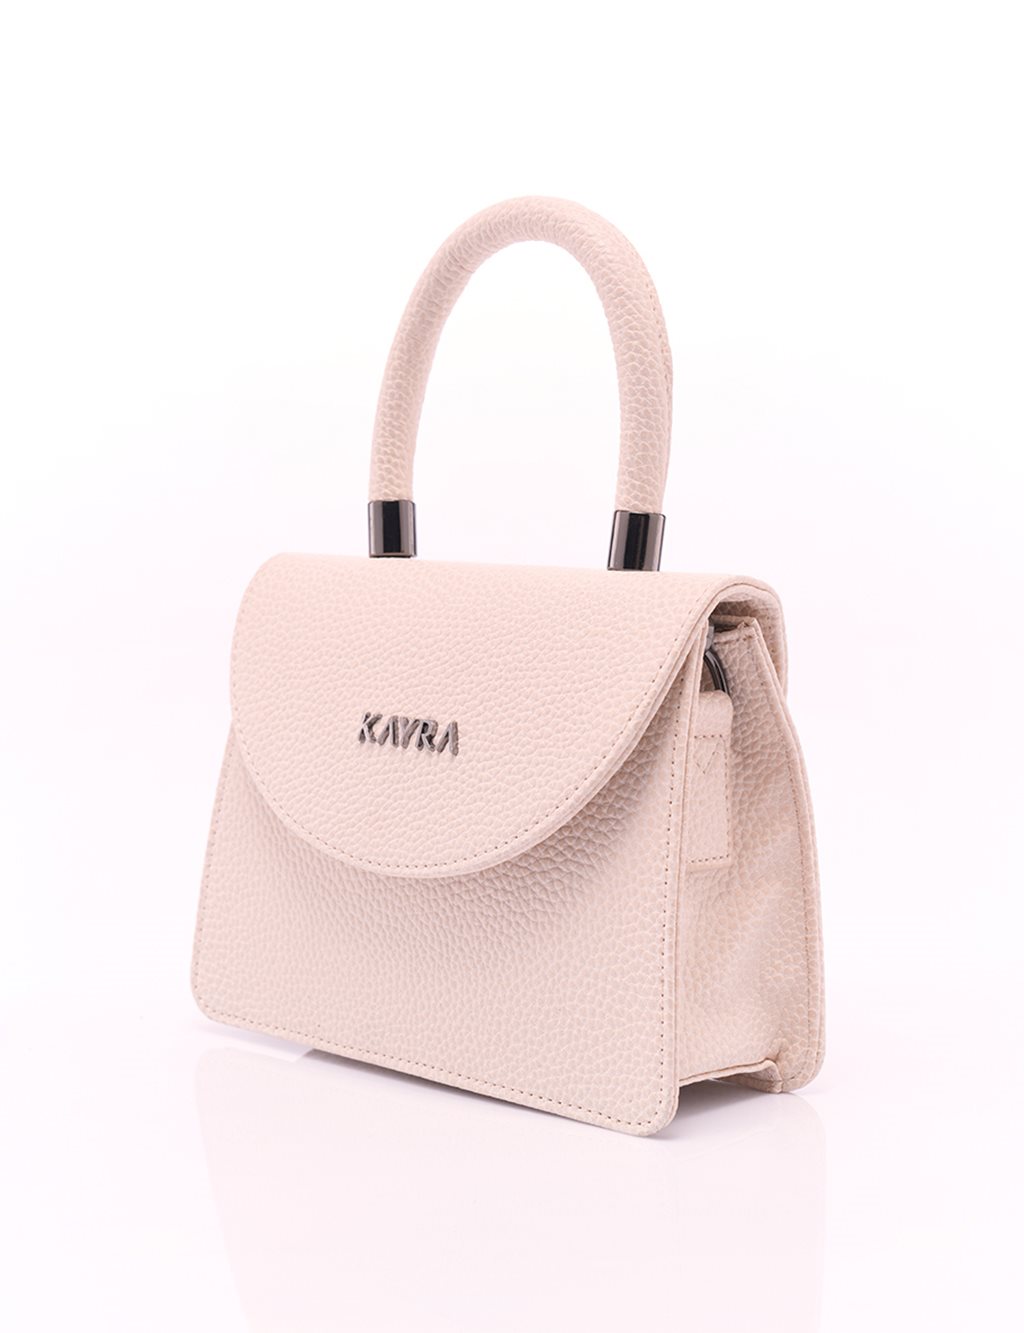 Artificial Leather Cover Bag Cream